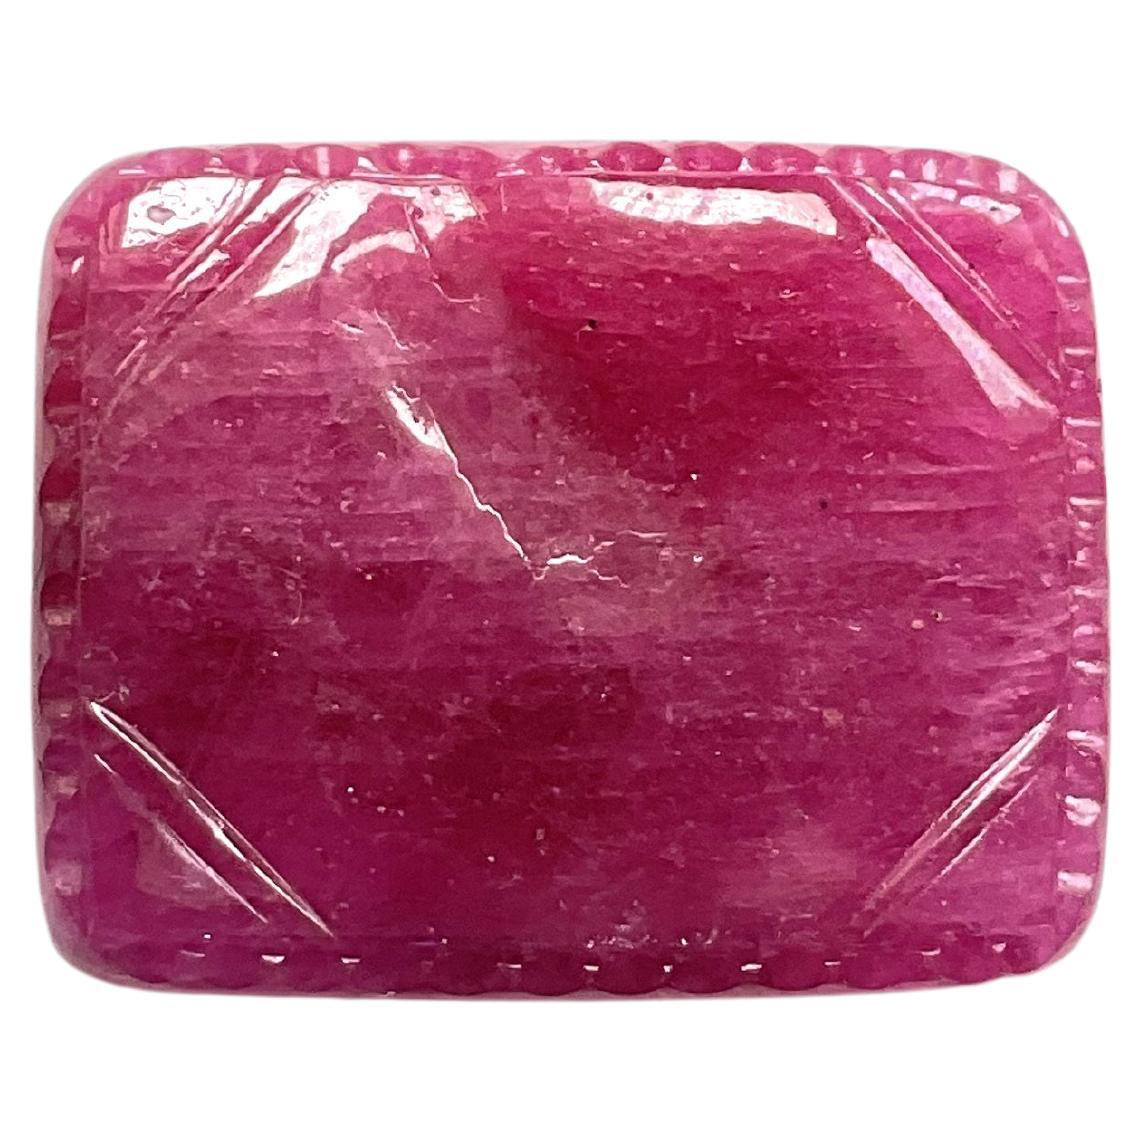 Certified 89.35 Carats Ruby Mozambique Carved Specimen Heated Natural Gemstone